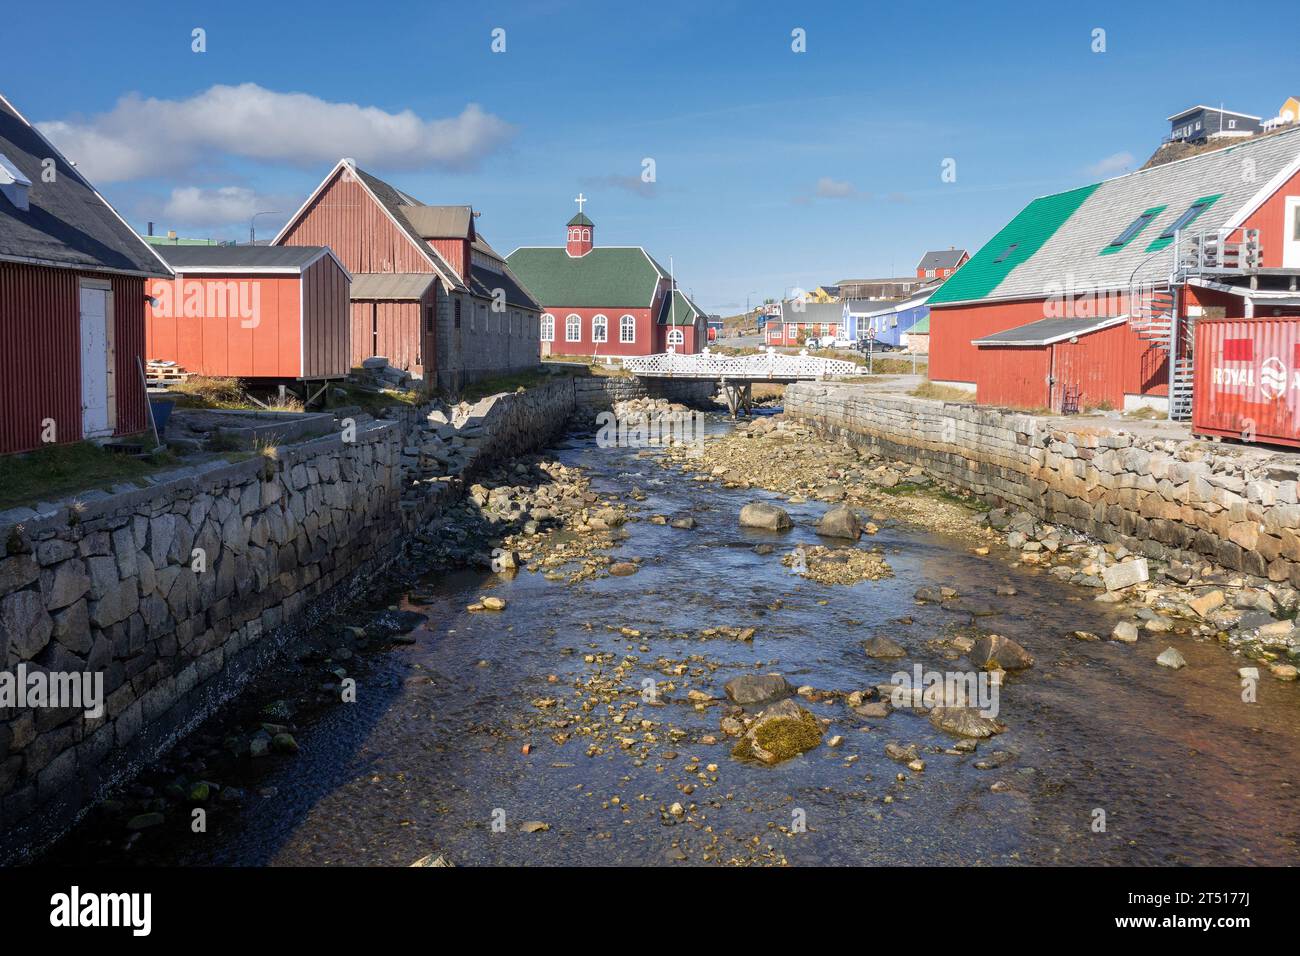 Small River Stream Running Through The Middle Of Qaqortoq Town In Greenland, The Church of Our Savior In The Background Stock Photo